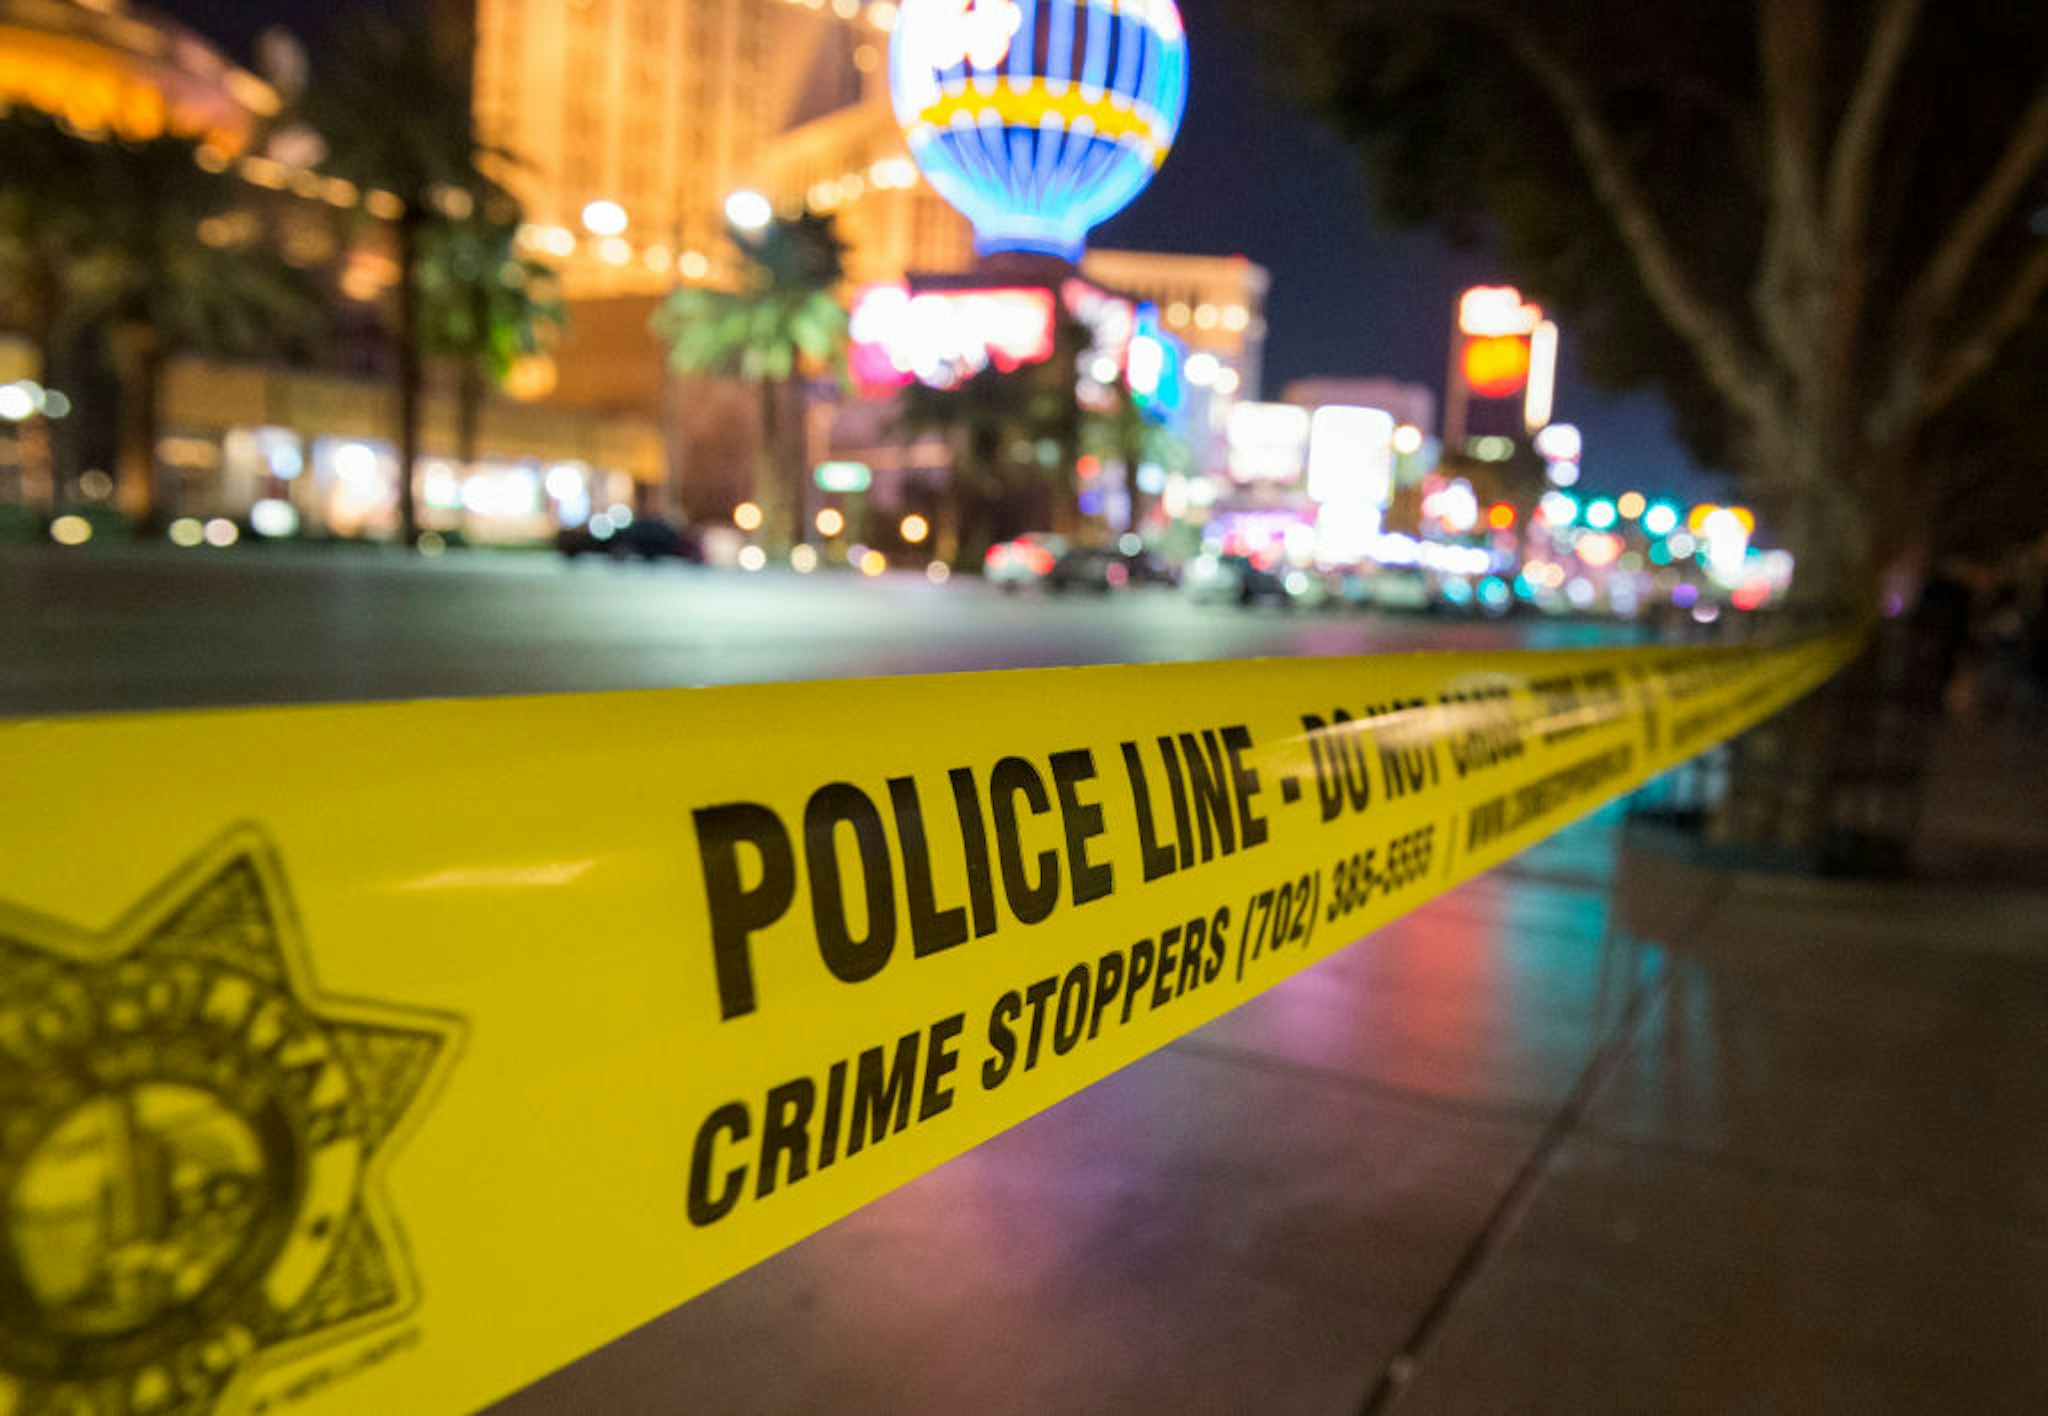 A police line blocks off part of the Las Vegas Strip after a car ran into a group of pedestrians between Planet Hollywood, where the Miss Universe pageant took place, and the Paris Las Vegas Hotel in Las Vegas, Nevada, on December 20, 2015. At least one person has died and more than 37 have been hurt after a car ran into a group of pedestrians on the bustling Las Vegas Strip on December 20, police said, adding the driver was in custody. AFP PHOTO / VALERIE MACON (Photo by Valerie MACON / AFP) (Photo credit should read VALERIE MACON/AFP via Getty Images)